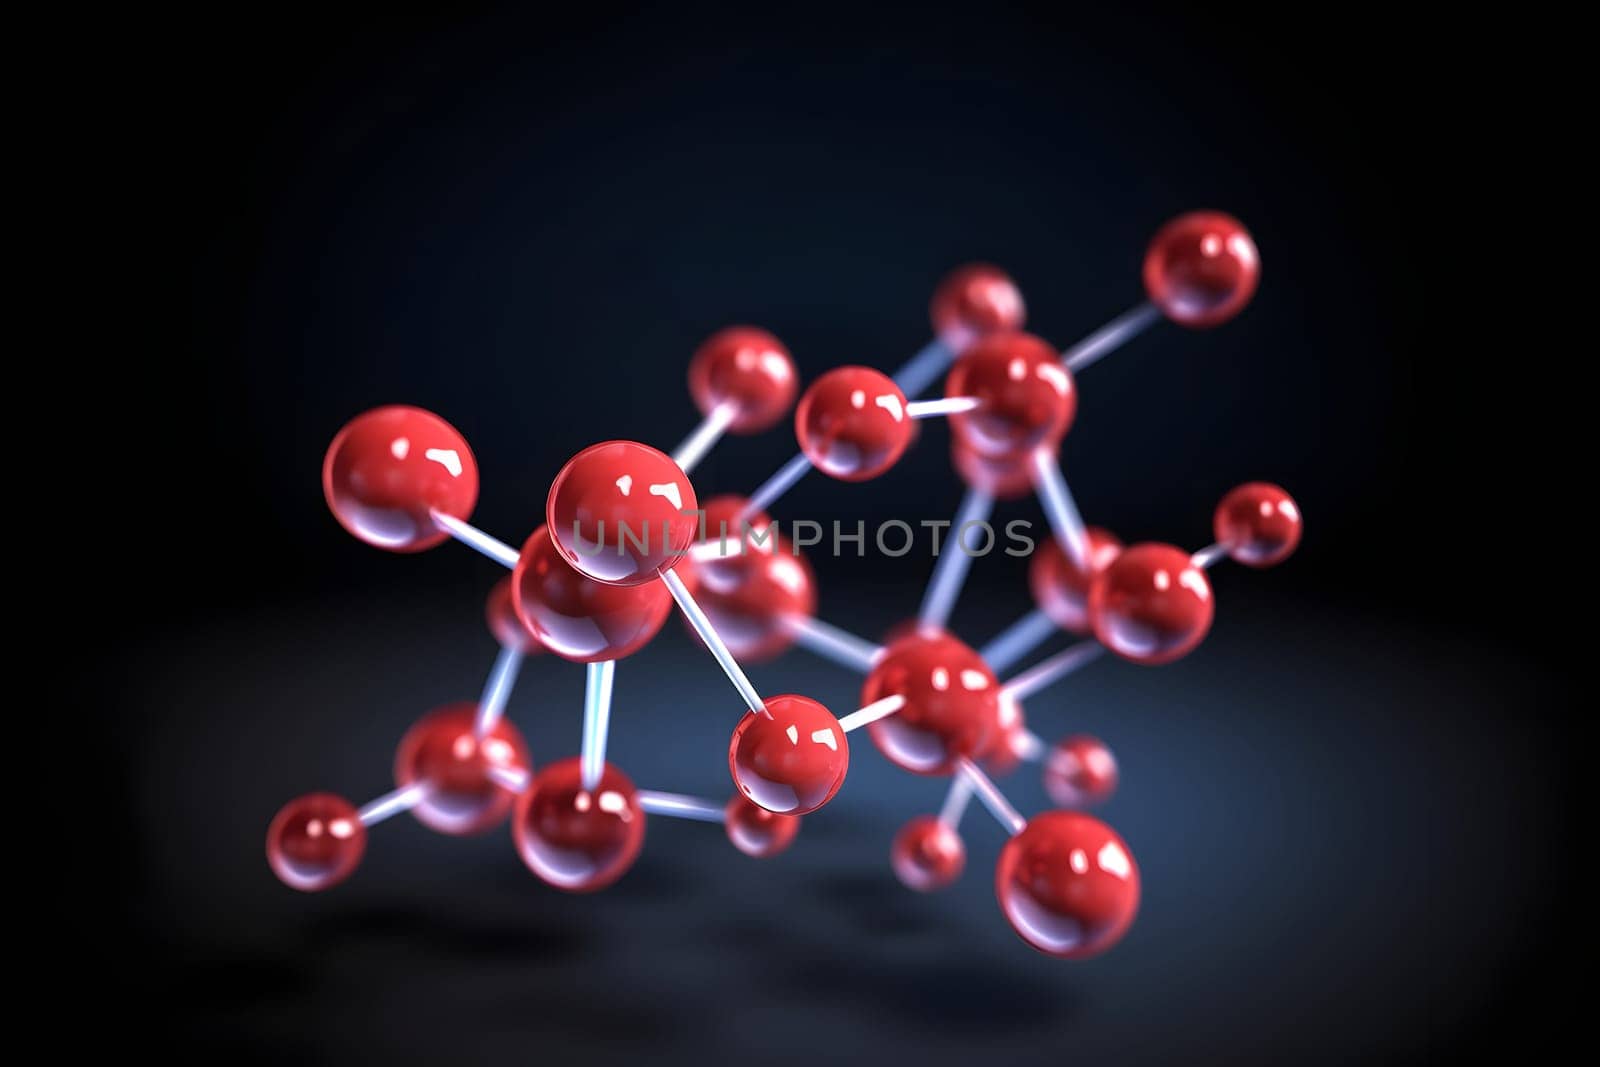 abstract molecule model on black background, neural network generated image by z1b